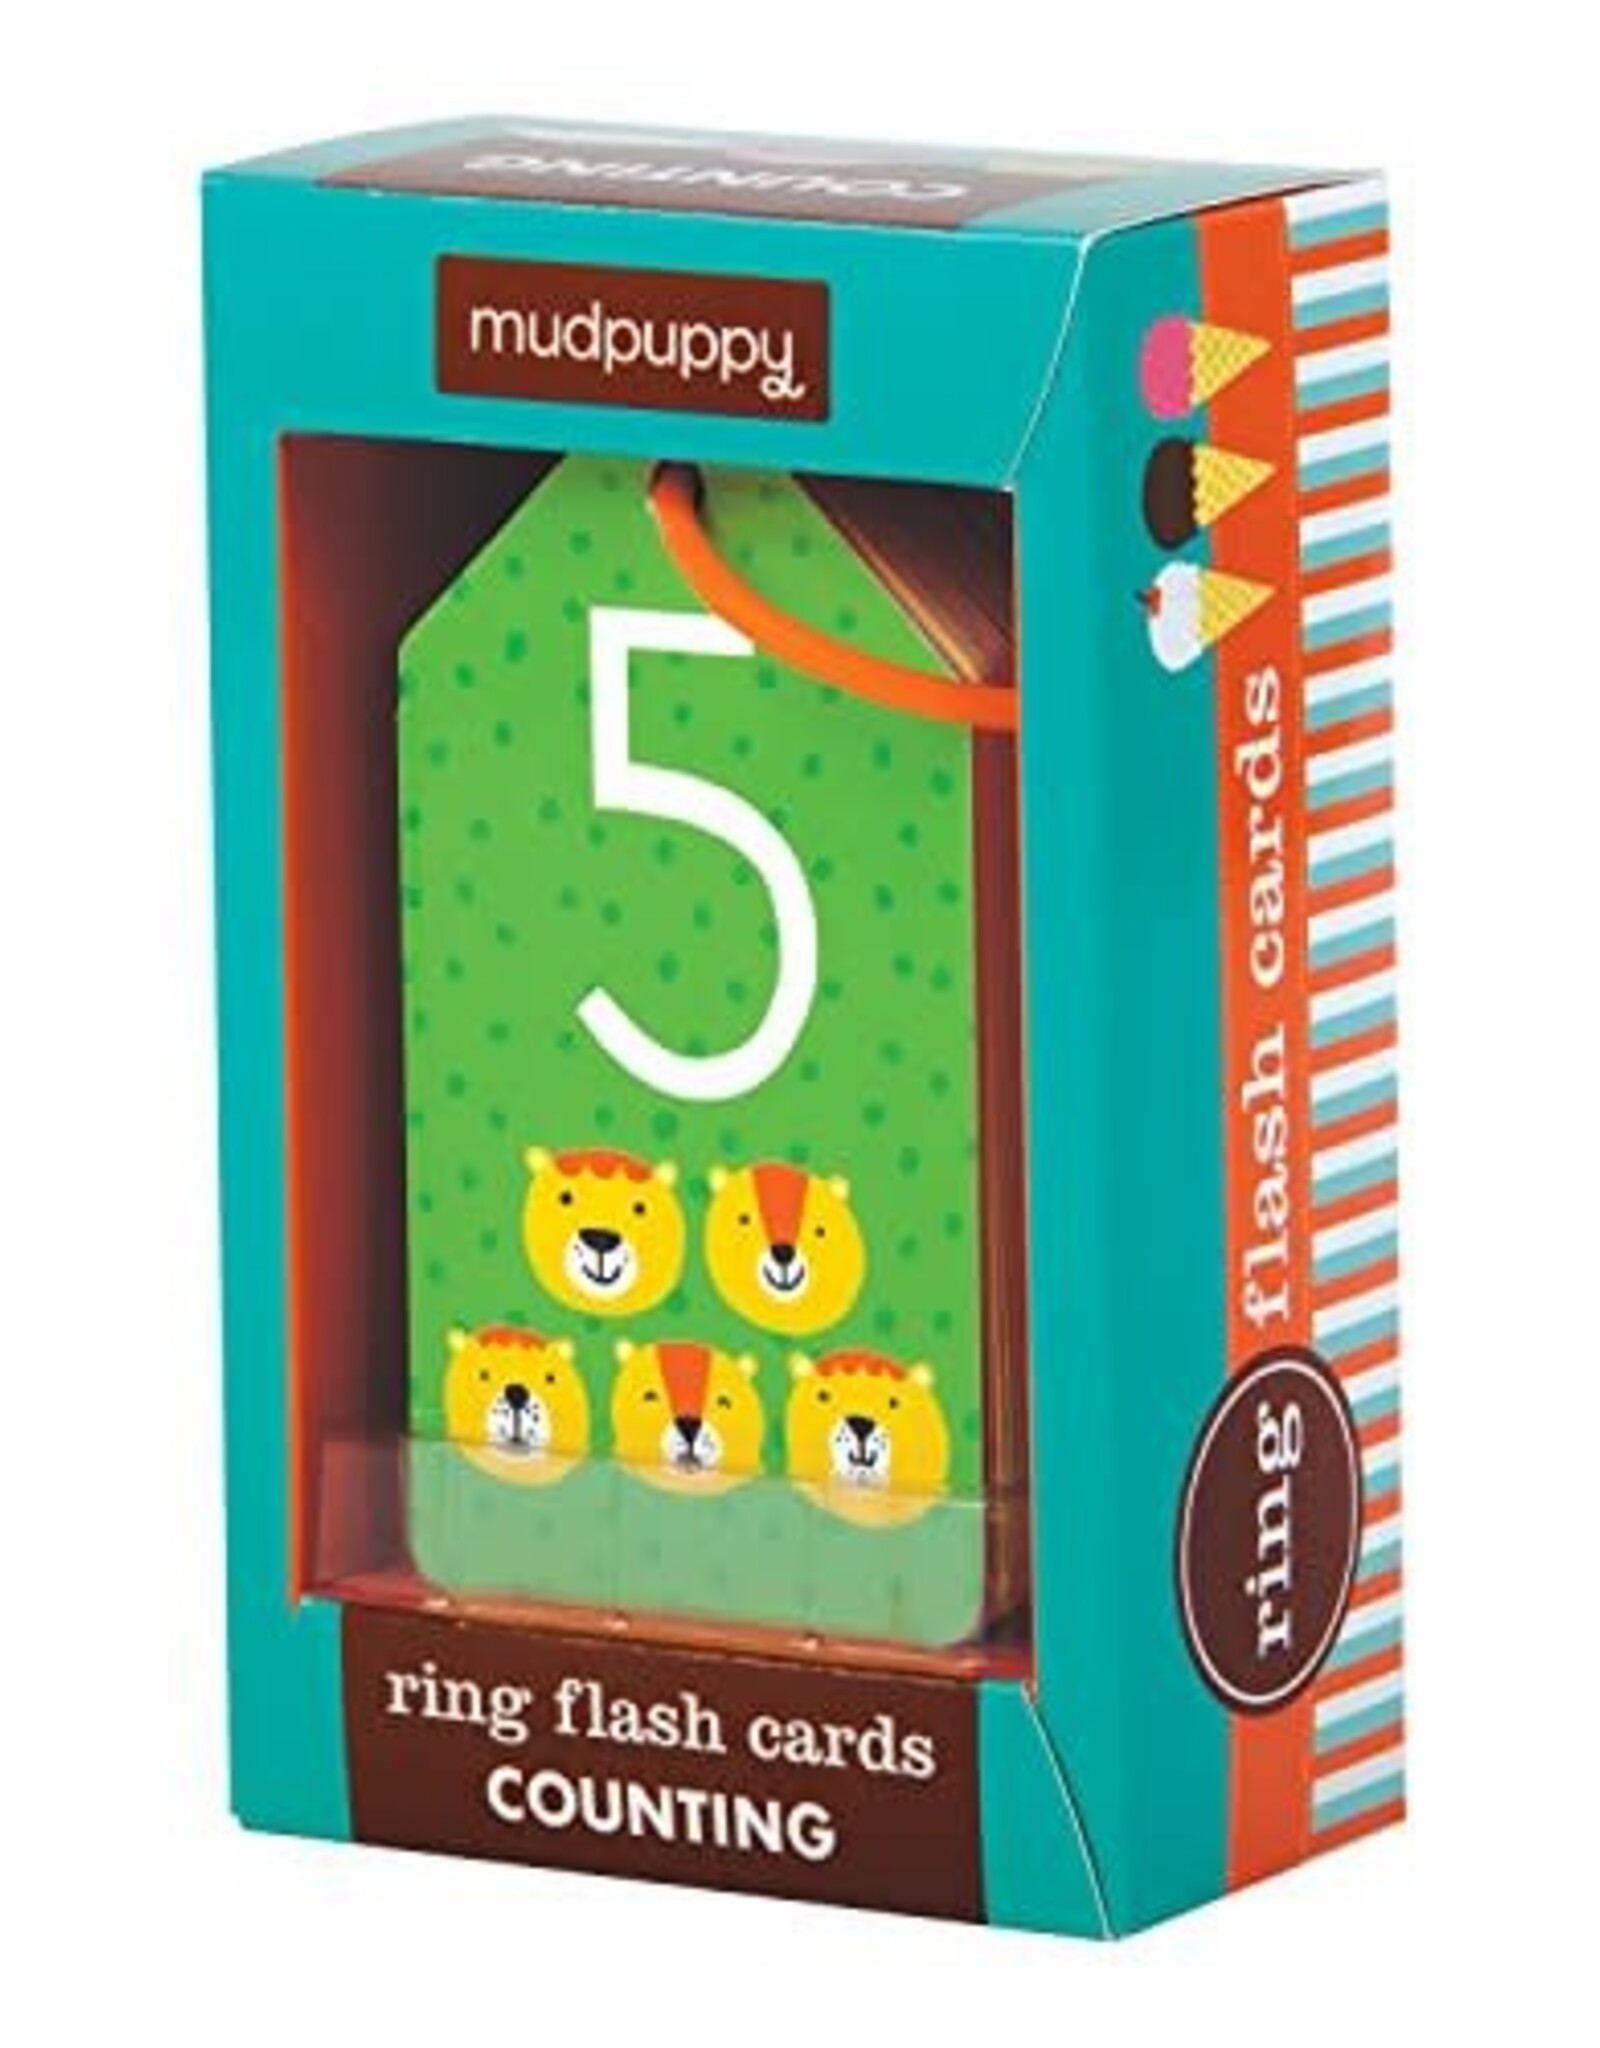 BOOK PUBLISHERS RING FLASH CARDS COUNTING